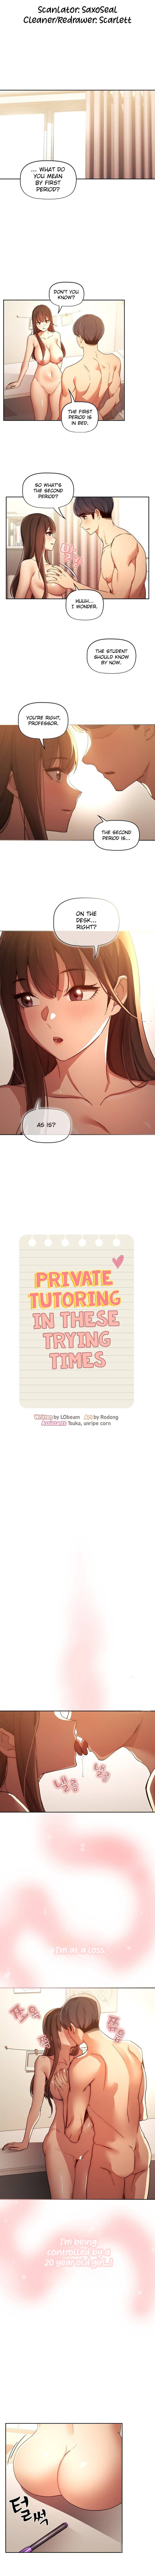 Private Tutoring in These Trying Times - Chapter 32 Page 1